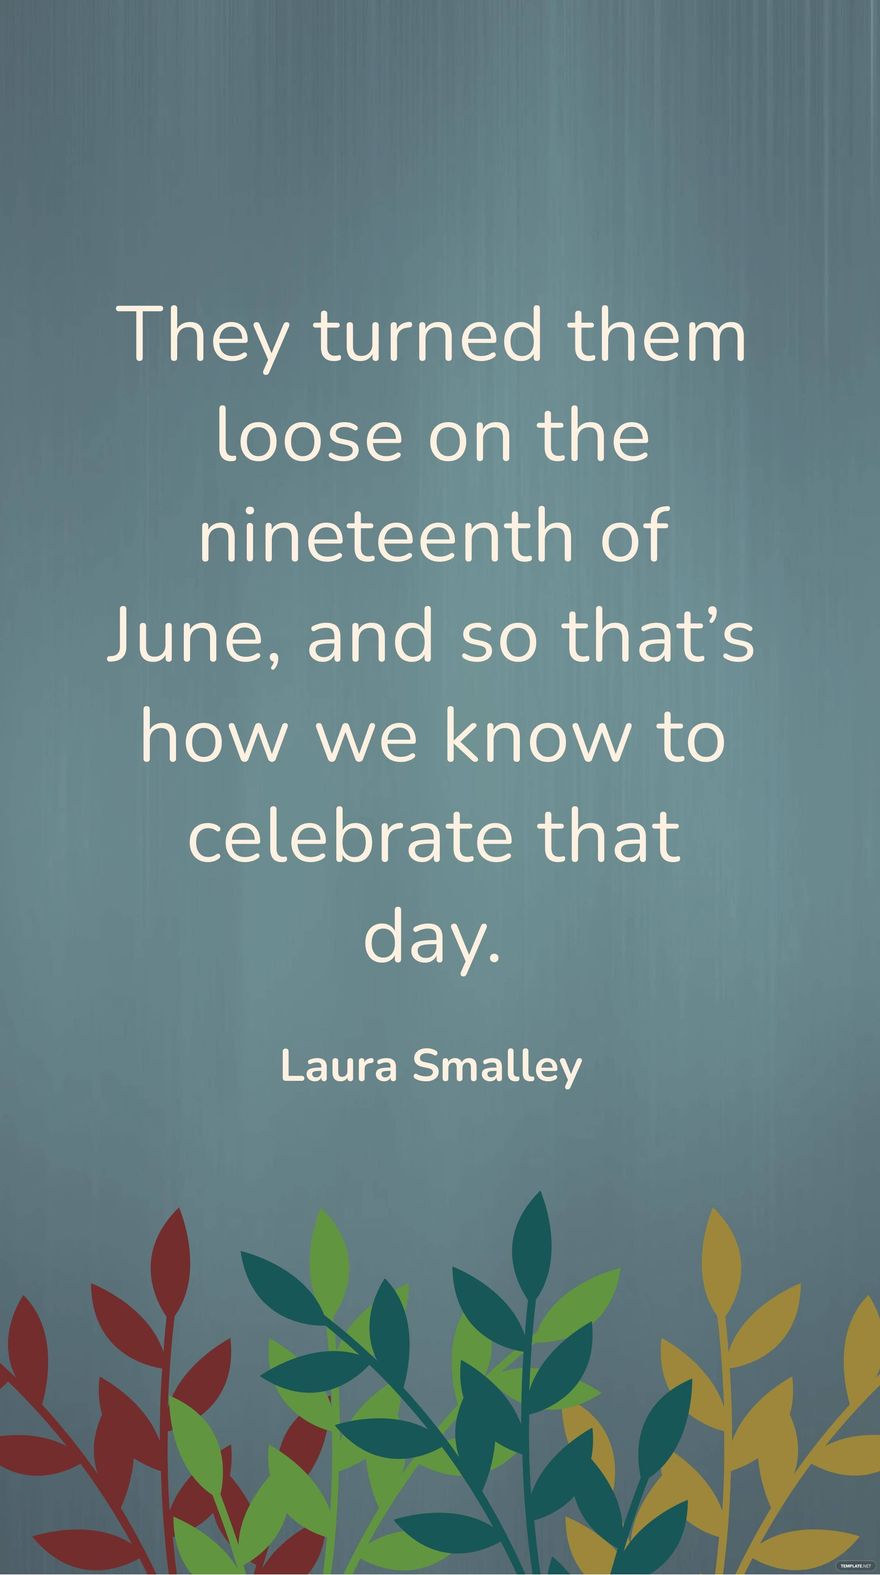 Free Laura Smalley - They turned them loose on the nineteenth of June, and so that’s how we know to celebrate that day. in JPG